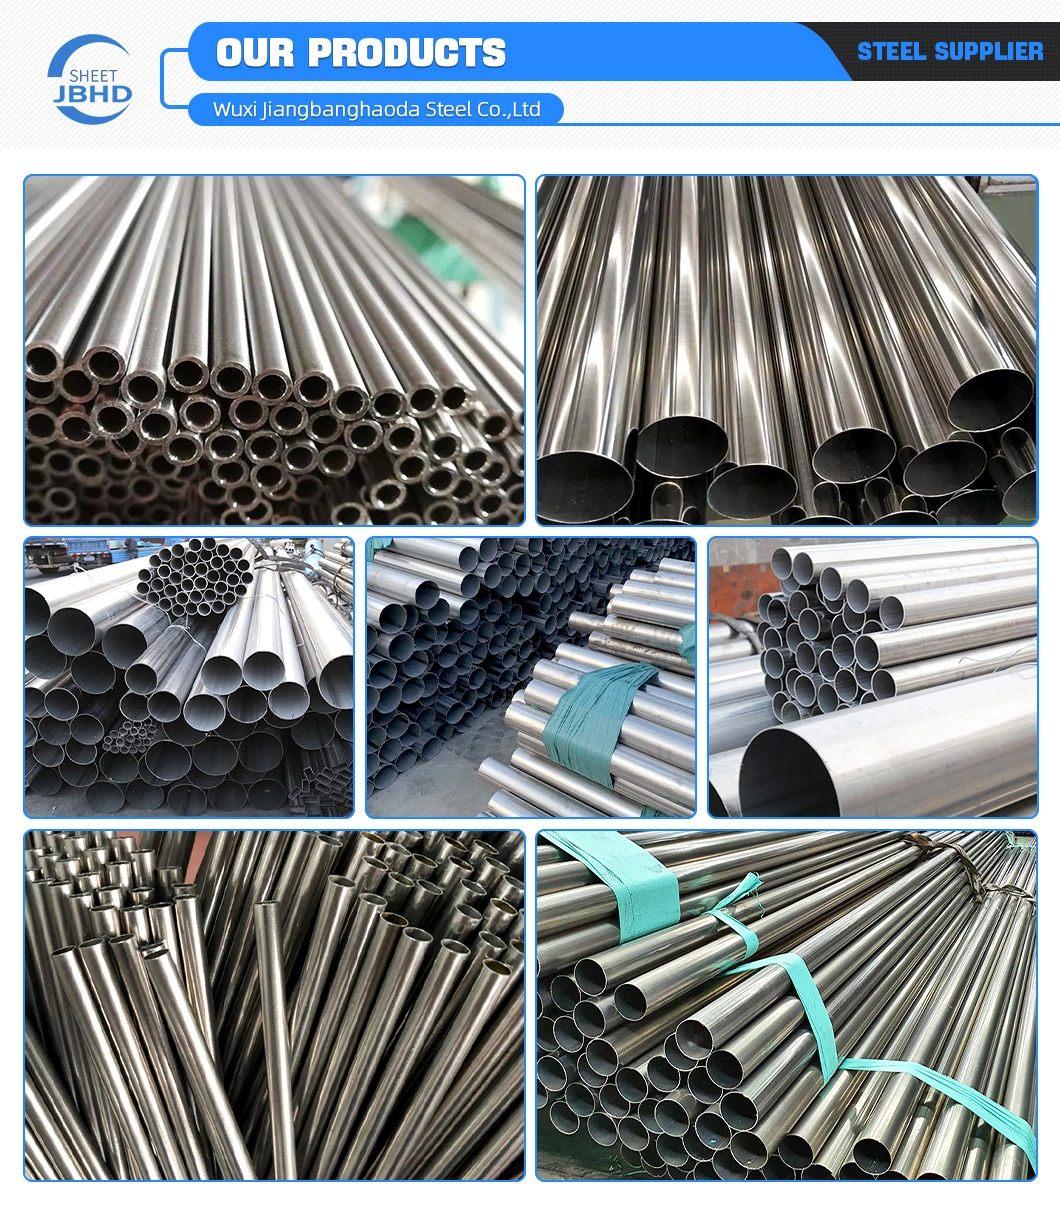 SS316L Stainless Steel Hexagon Hollow Pipe/Tube Od 22.22mmaf *ID 10.7mm in Stock